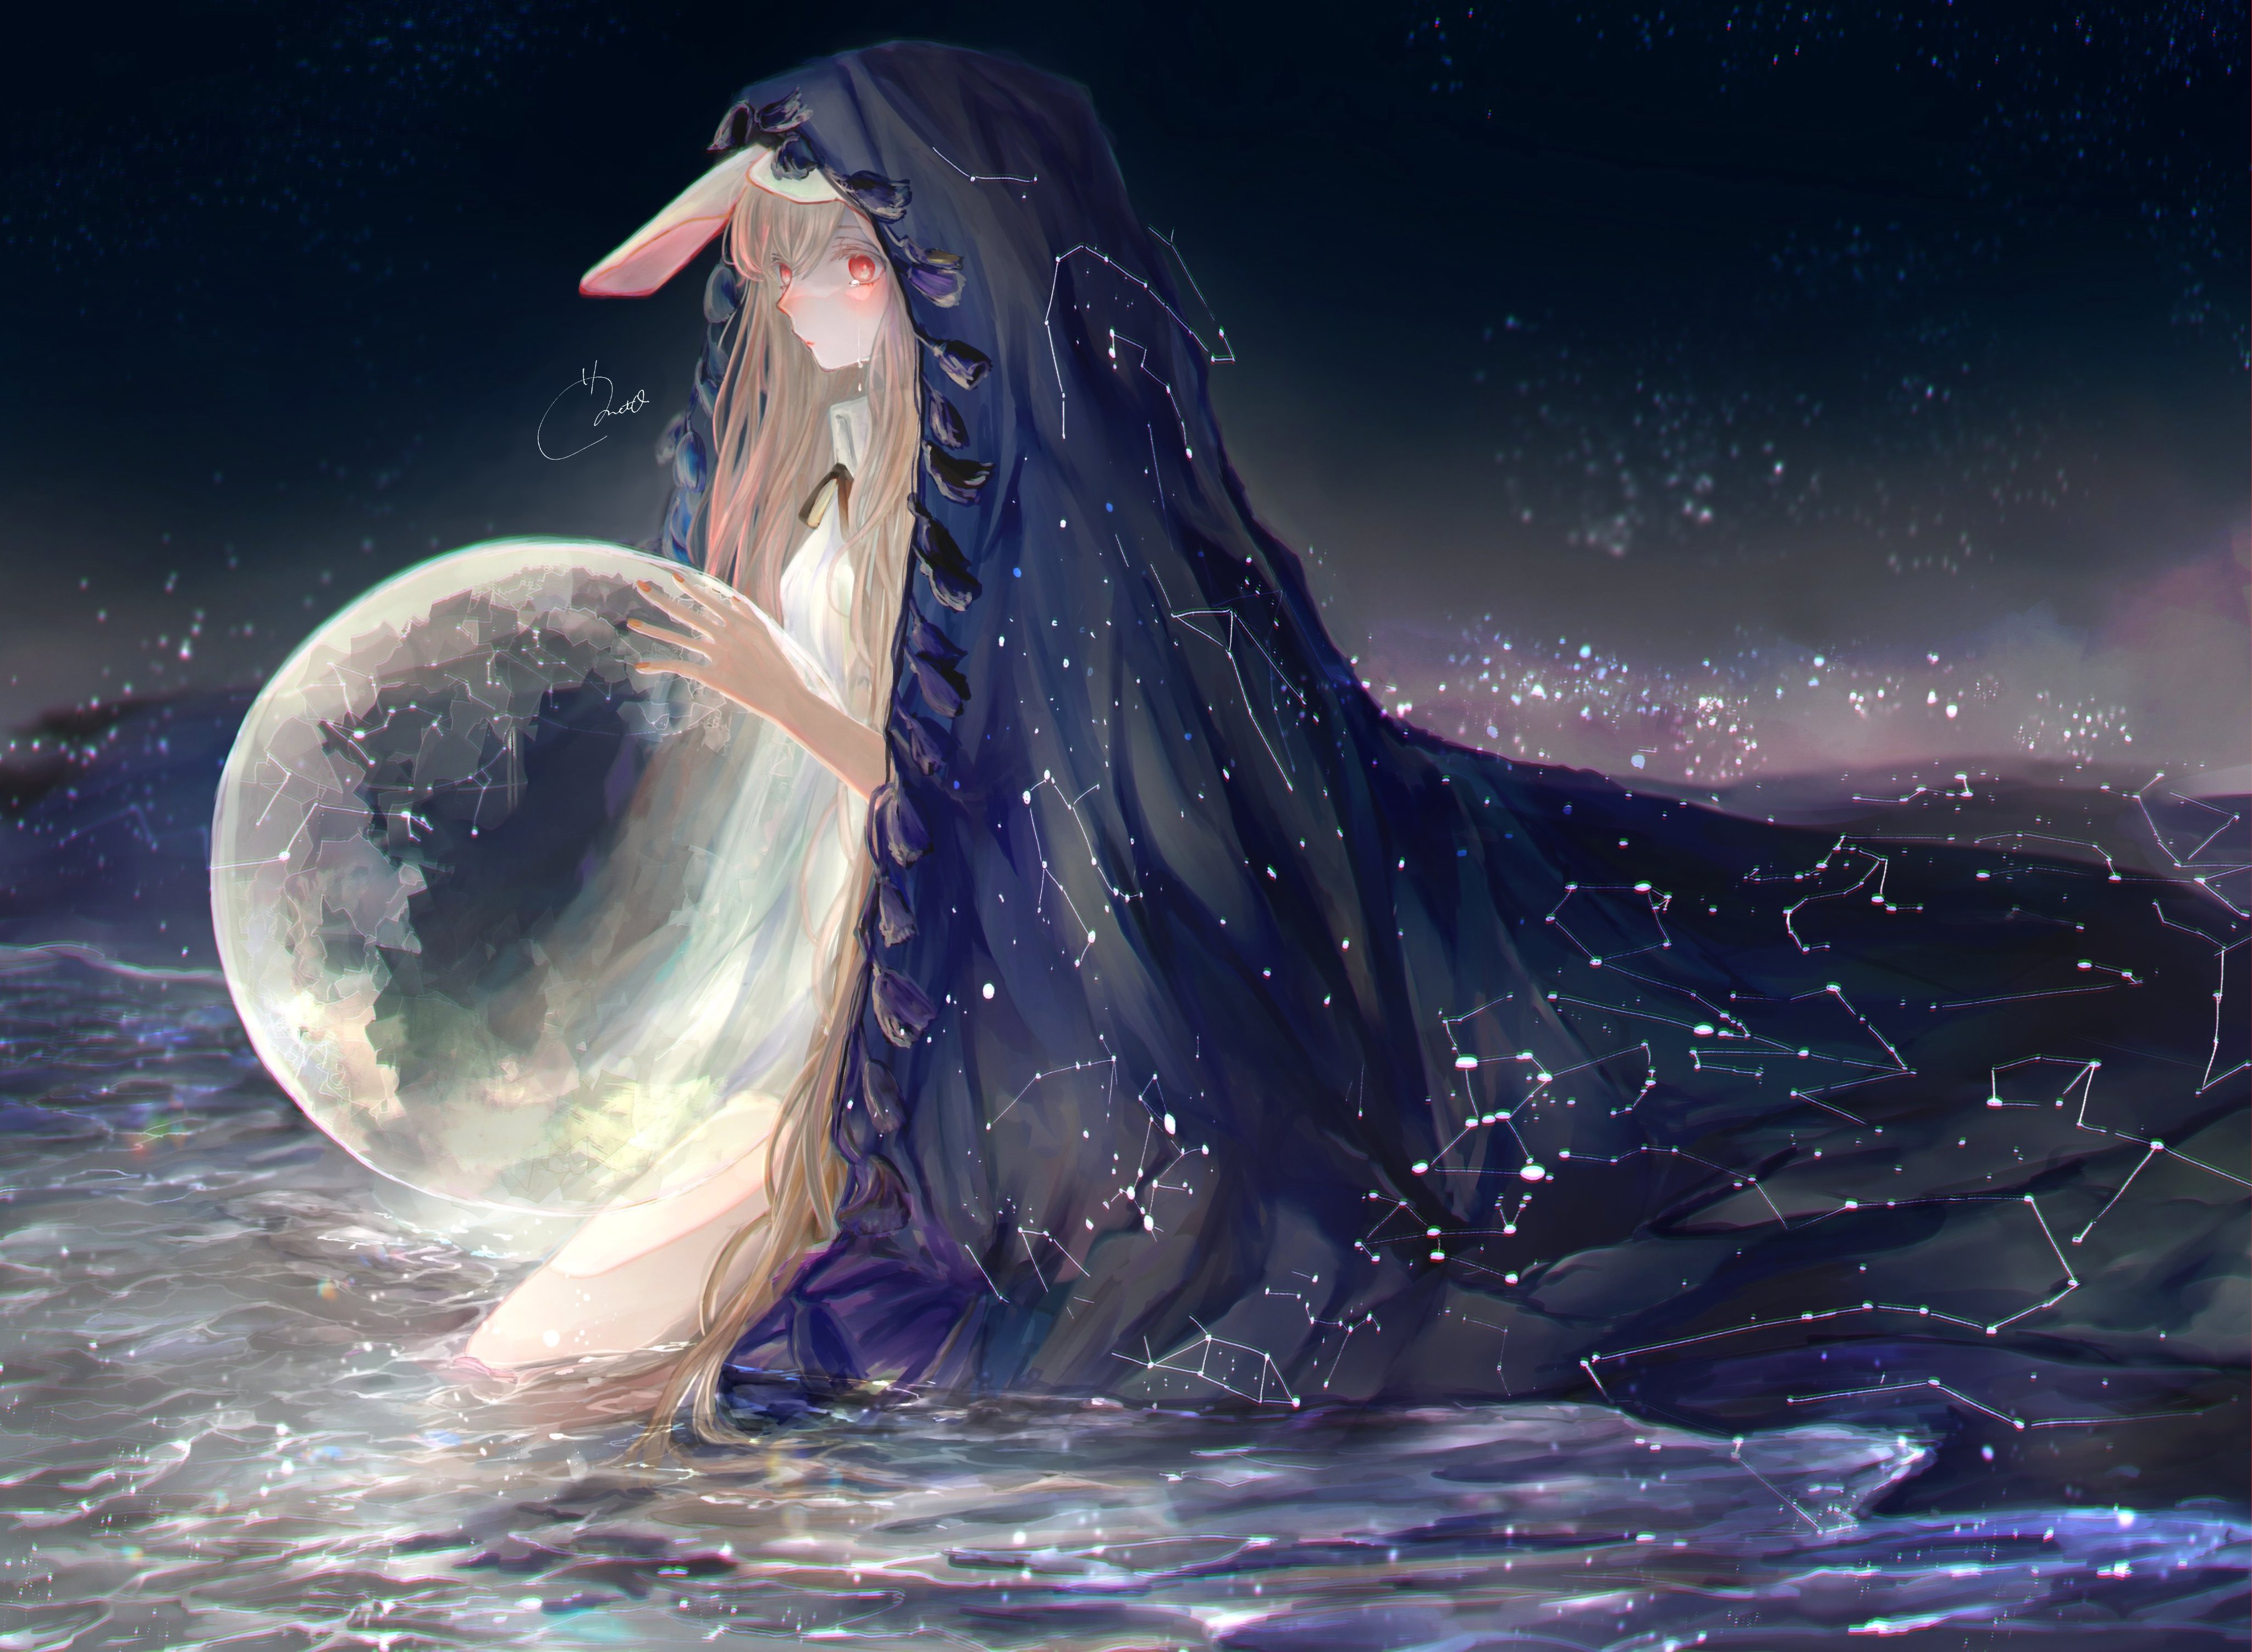 Anime 4096x3005 anime anime girls planet bunny ears blonde long hair in water space stars red eyes cape fantasy art